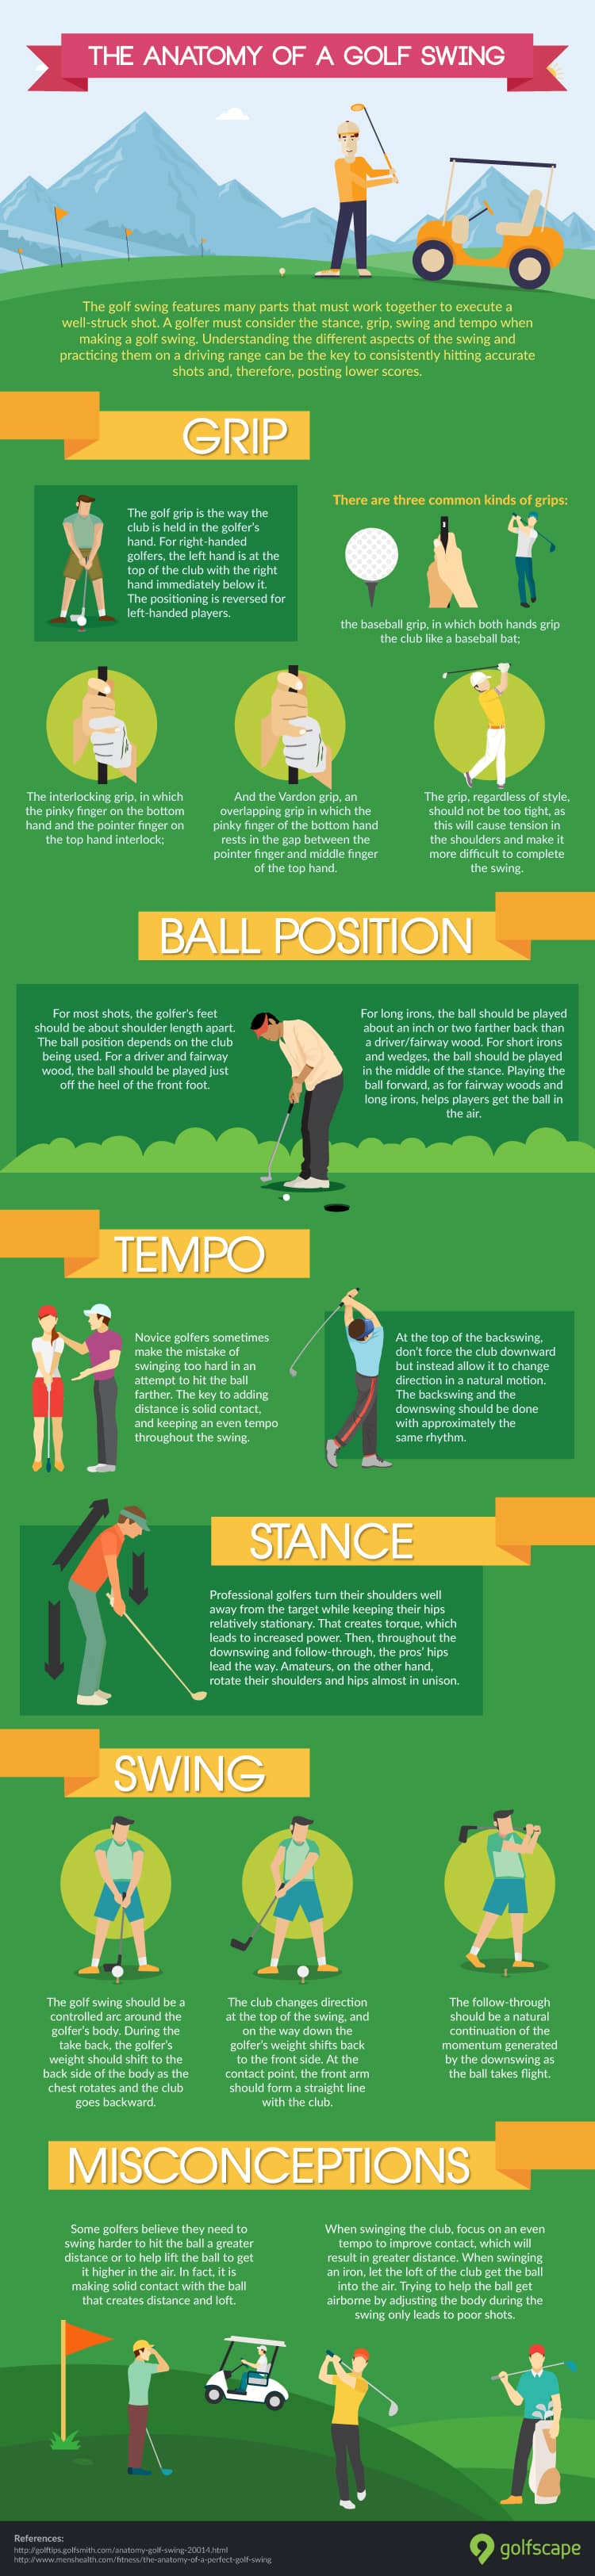 the-anatomy-of-a-golf-swing